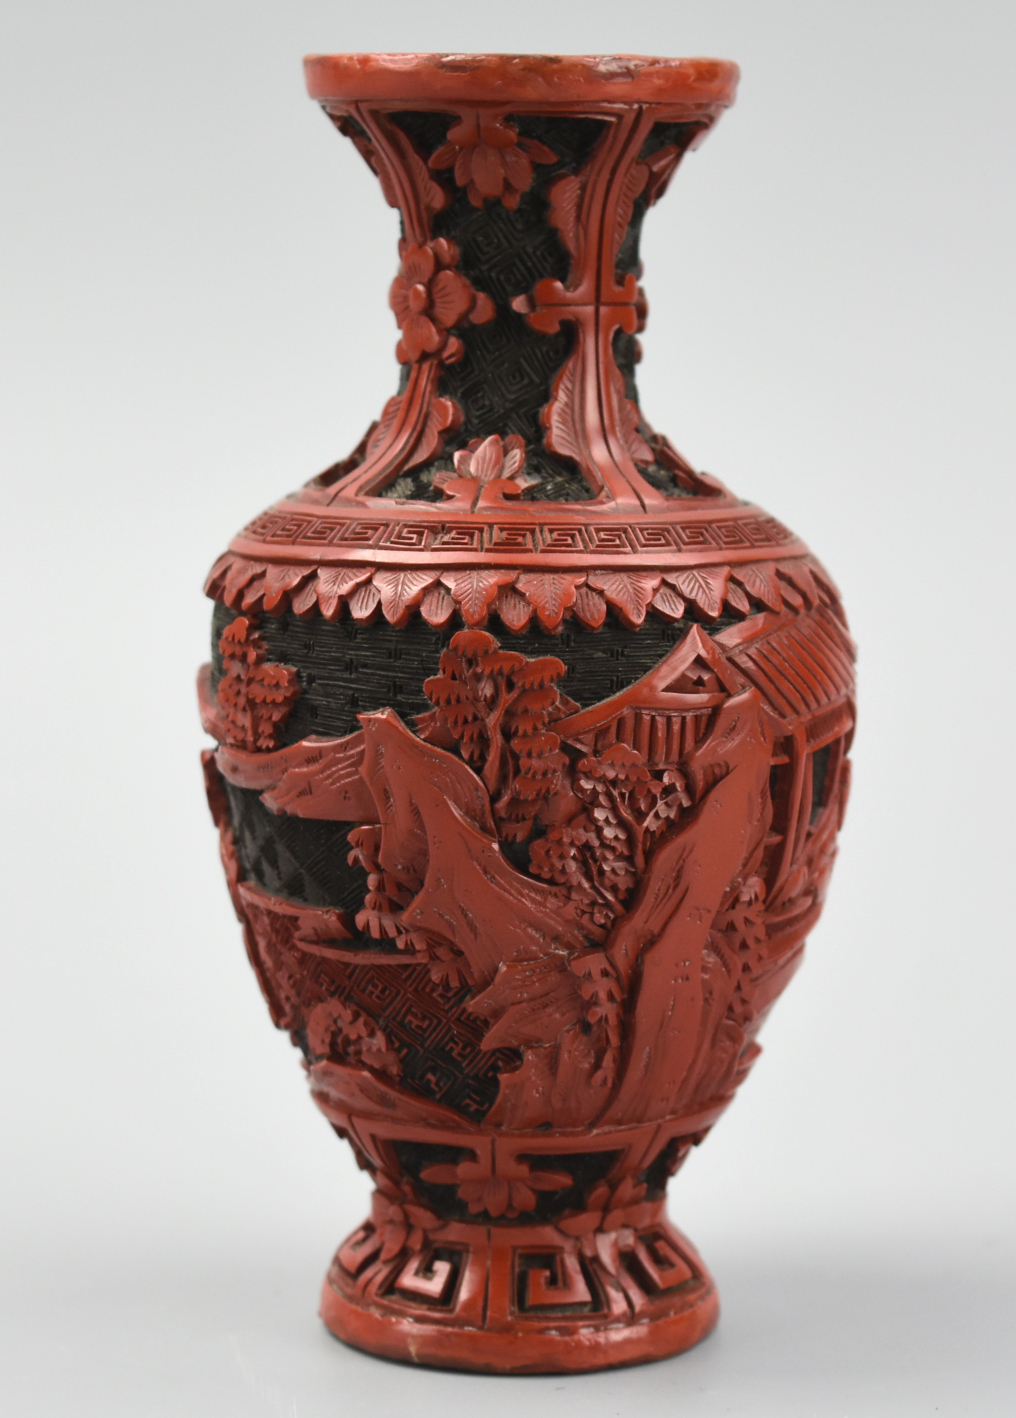 SMALL CHINESE LACQUERWARE VASE,QING